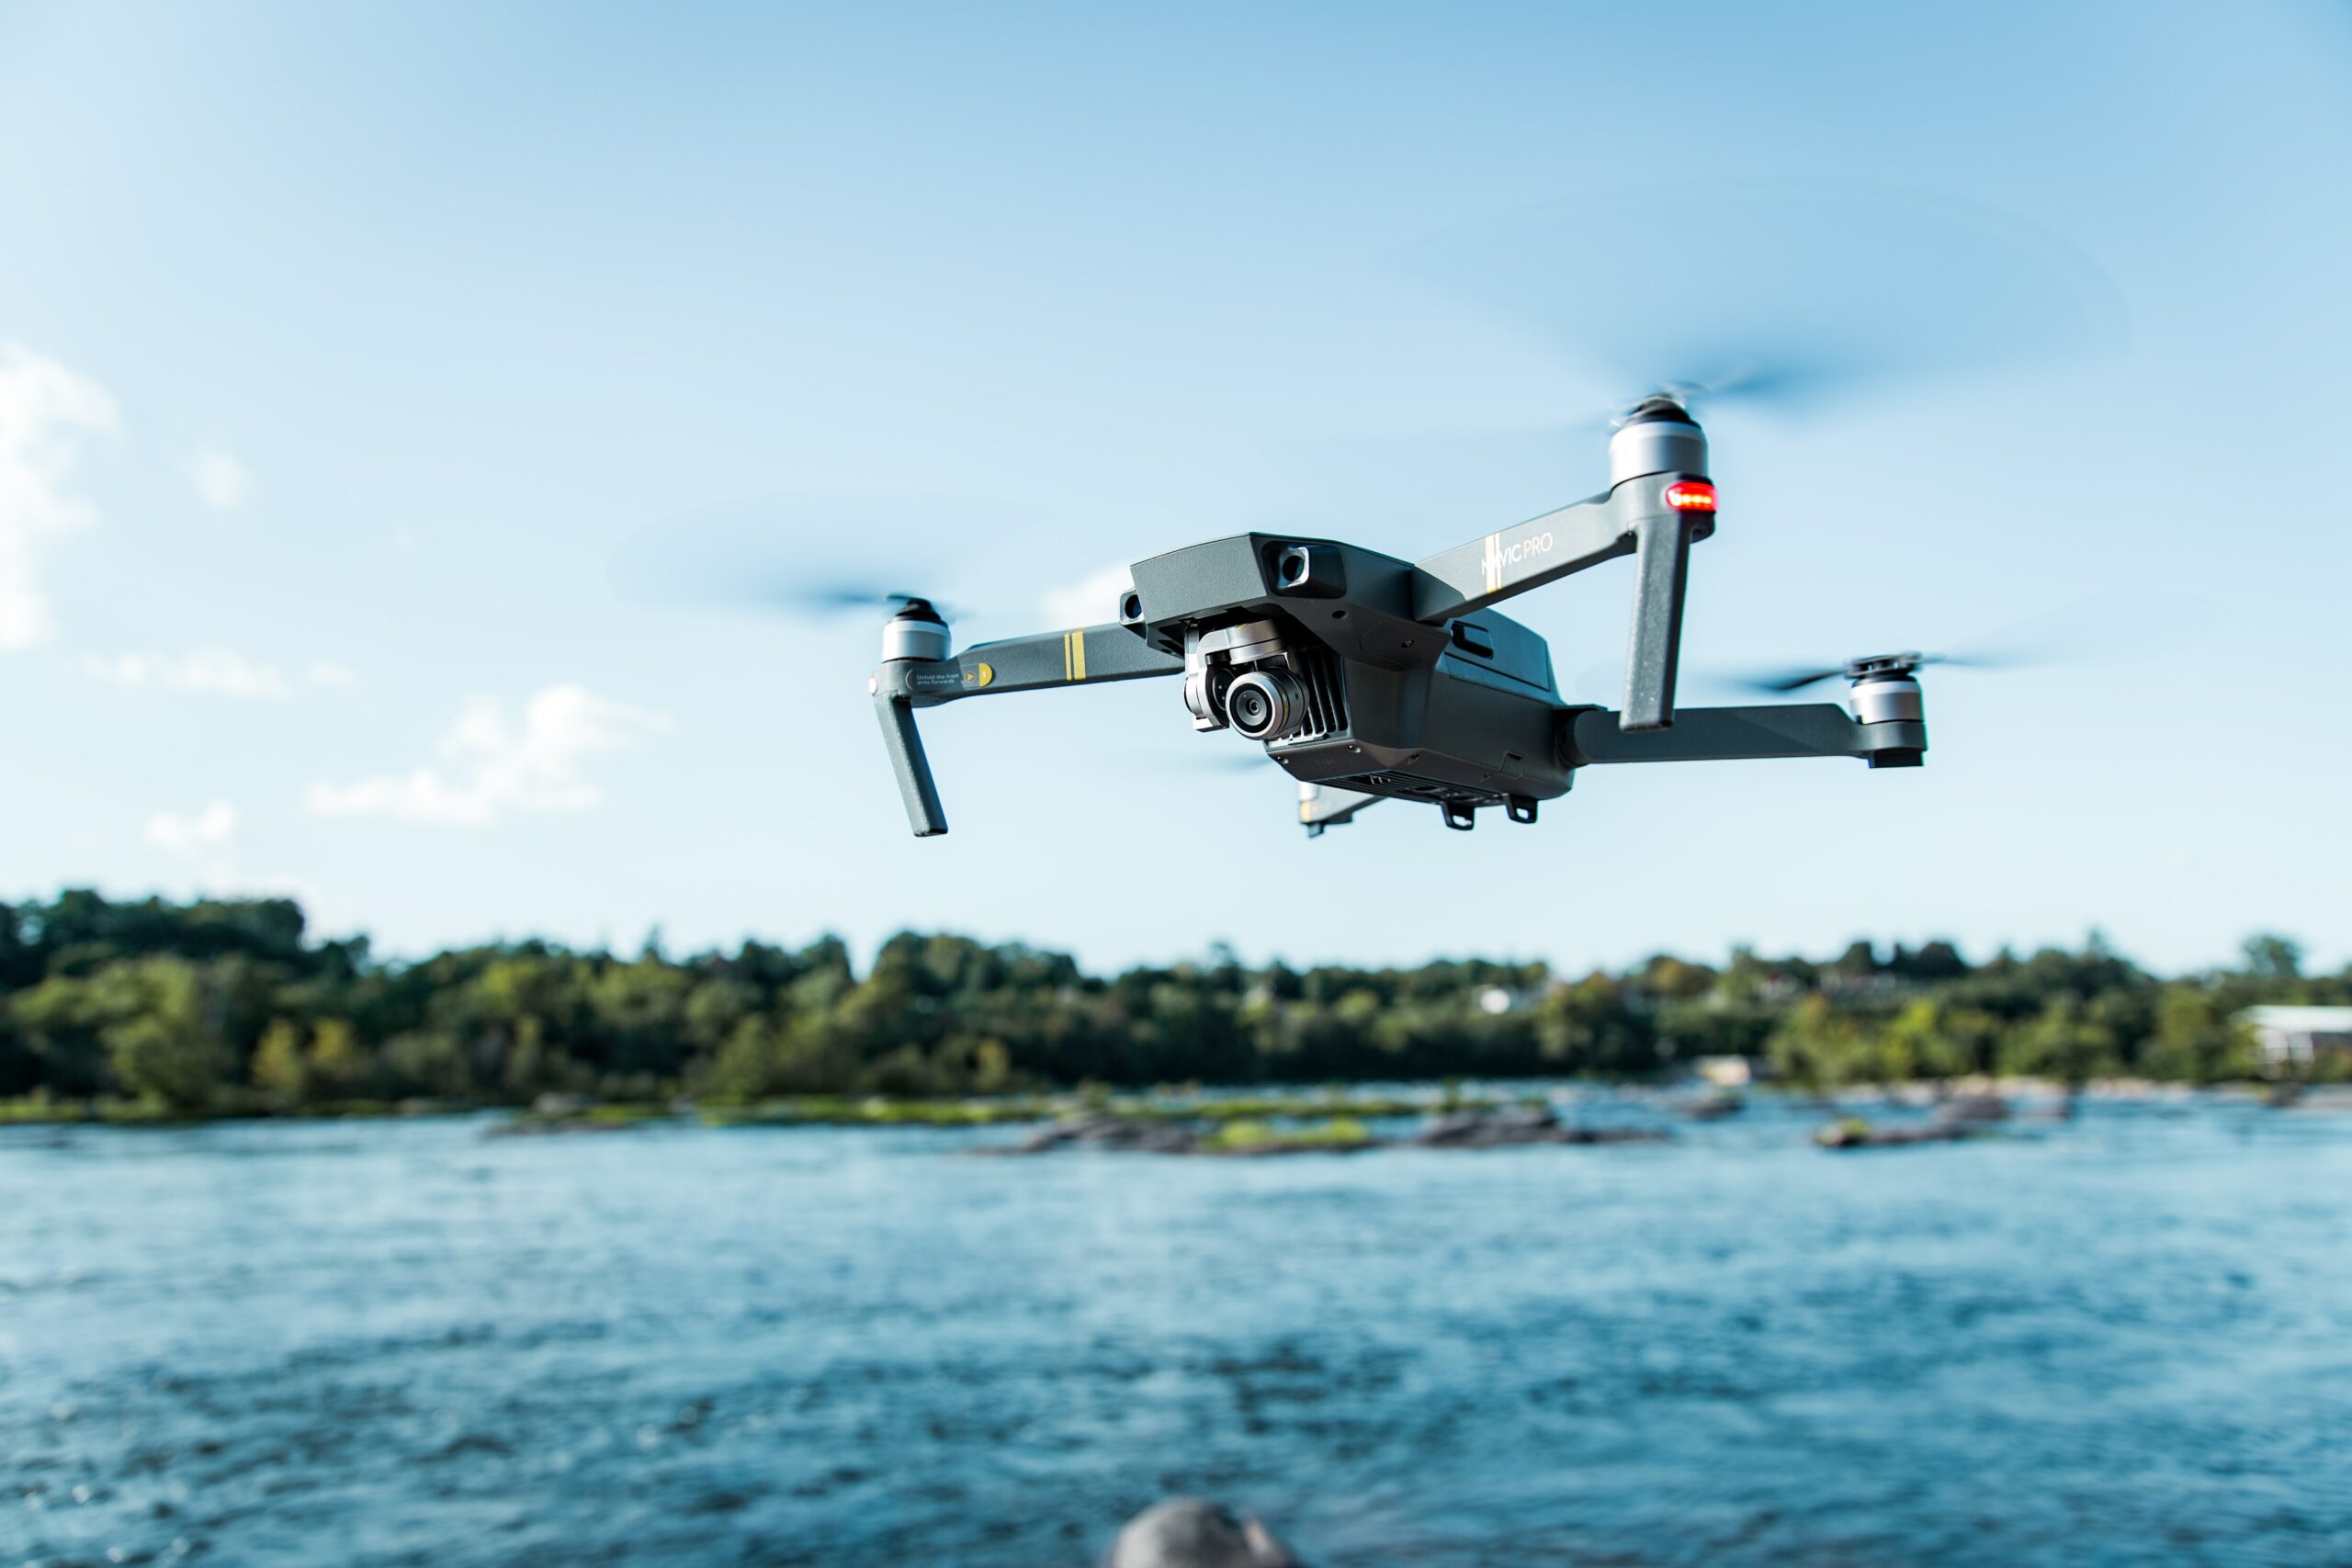 DJI Mavic Drone over the James River in Richmond Photo by Karl Greif on Unsplash